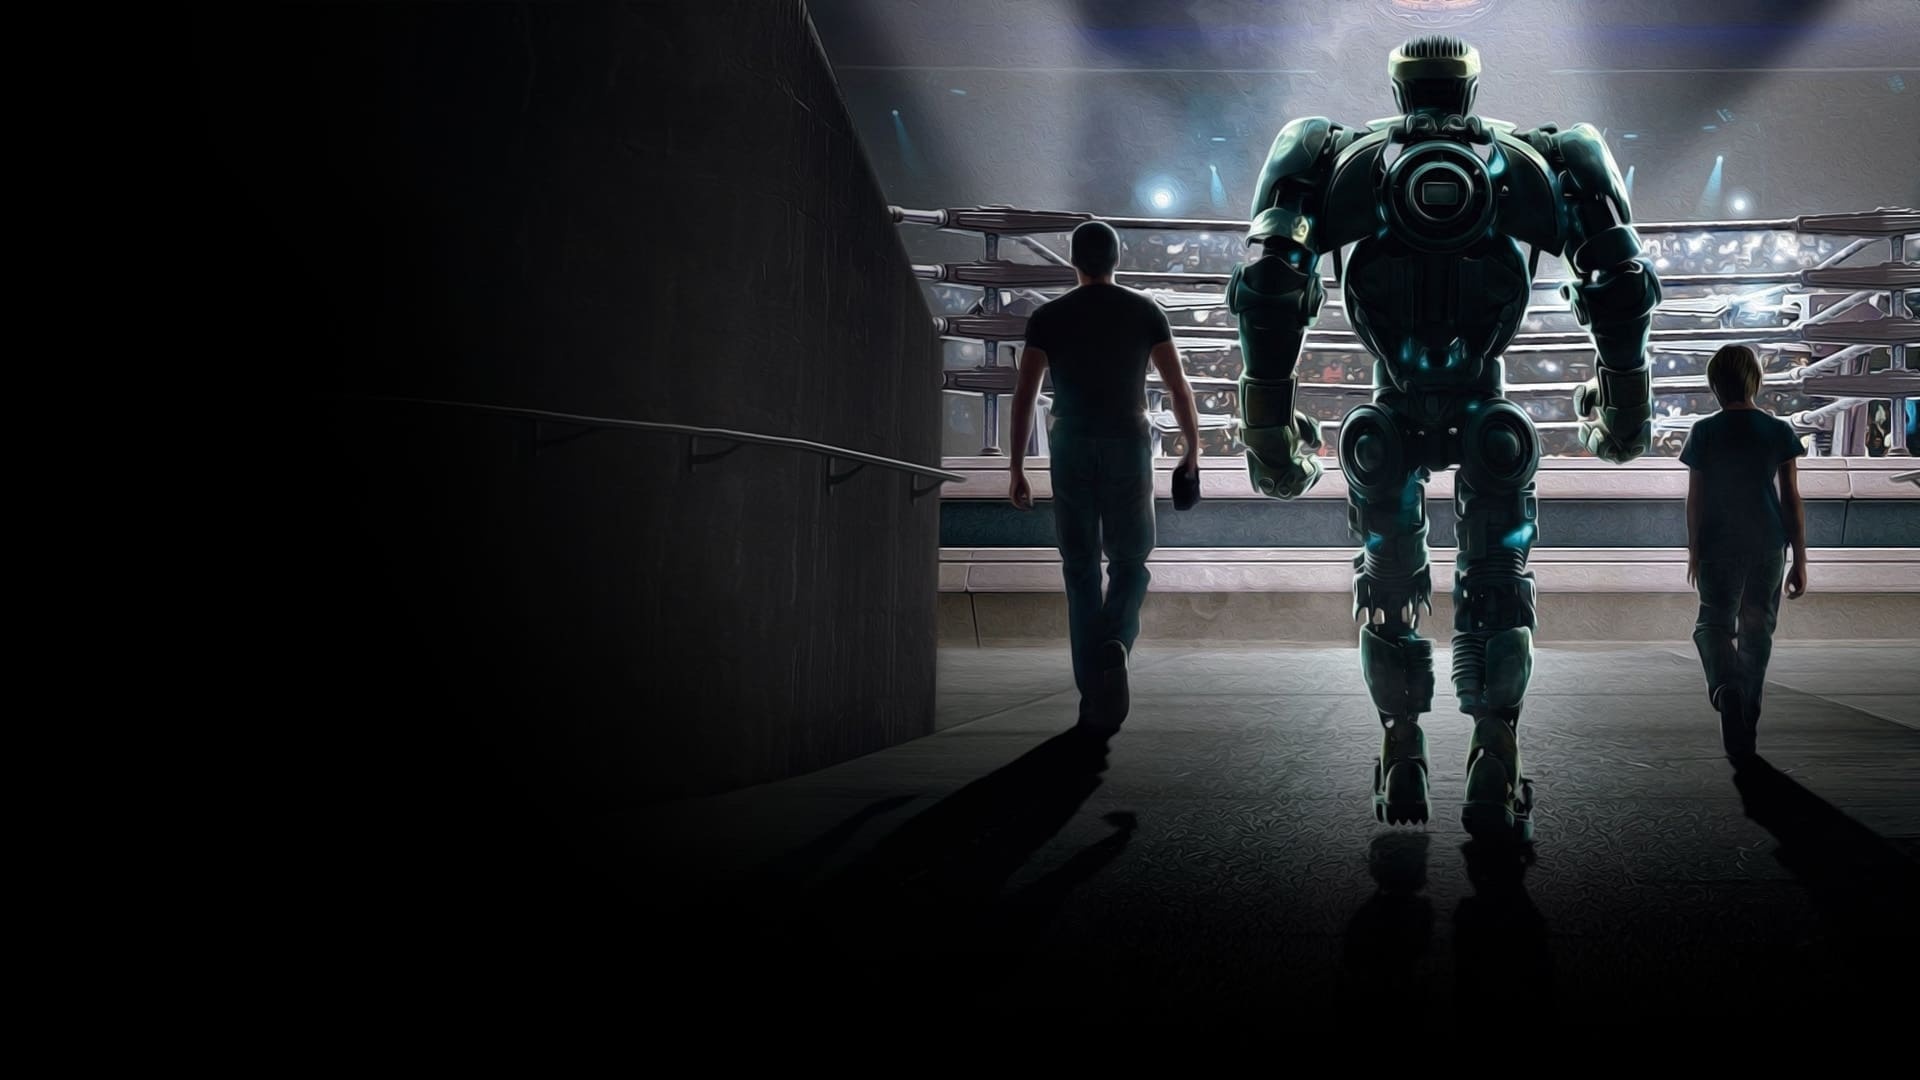 Real Steel: The story of a father, a son, and a decommissioned robot fighter. 1920x1080 Full HD Wallpaper.